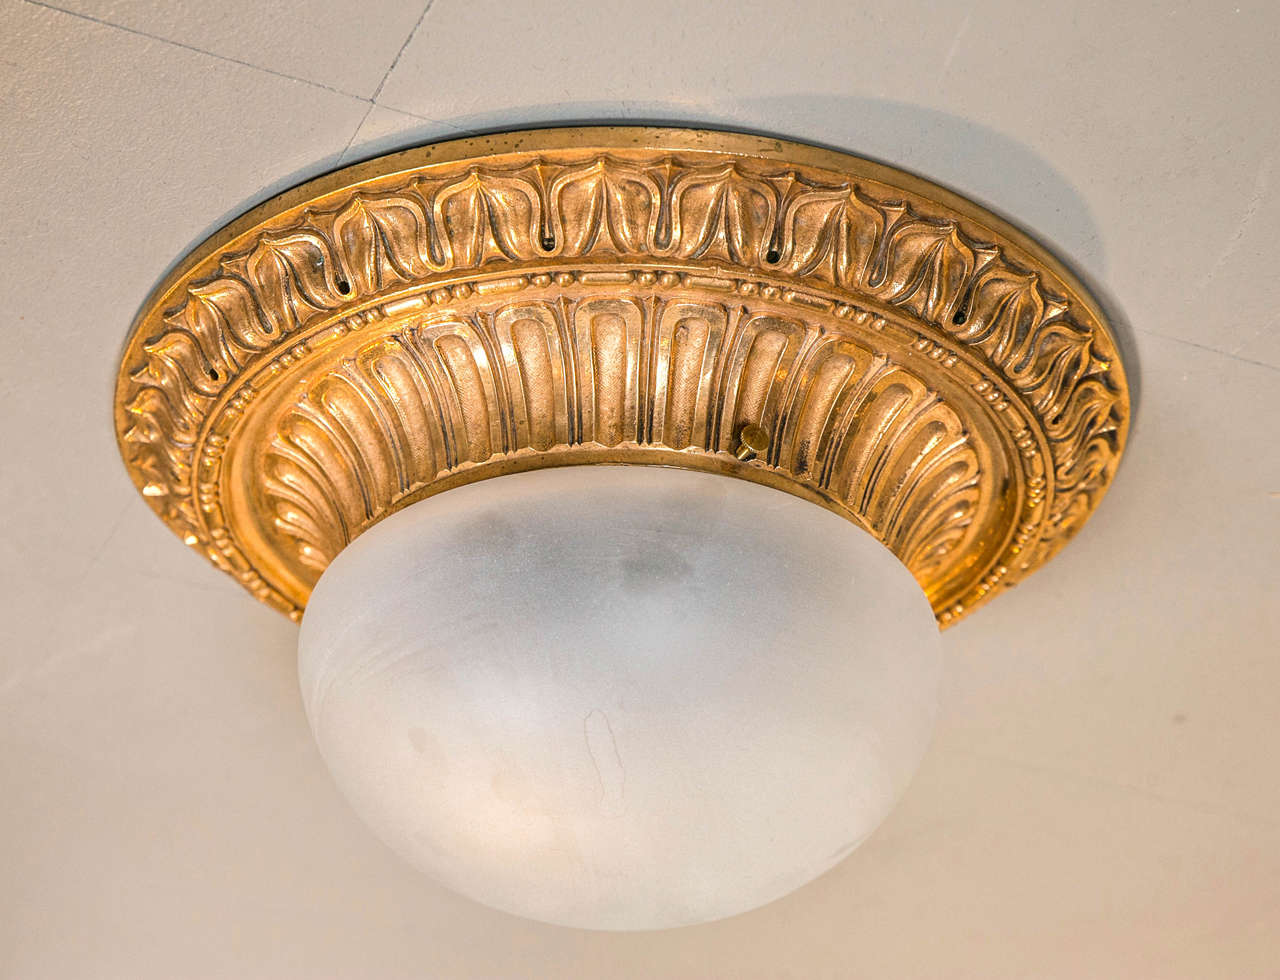 Circa 1900 Caldwell gilt bronze flush mount fixture, with frosted glass insert. Four available.